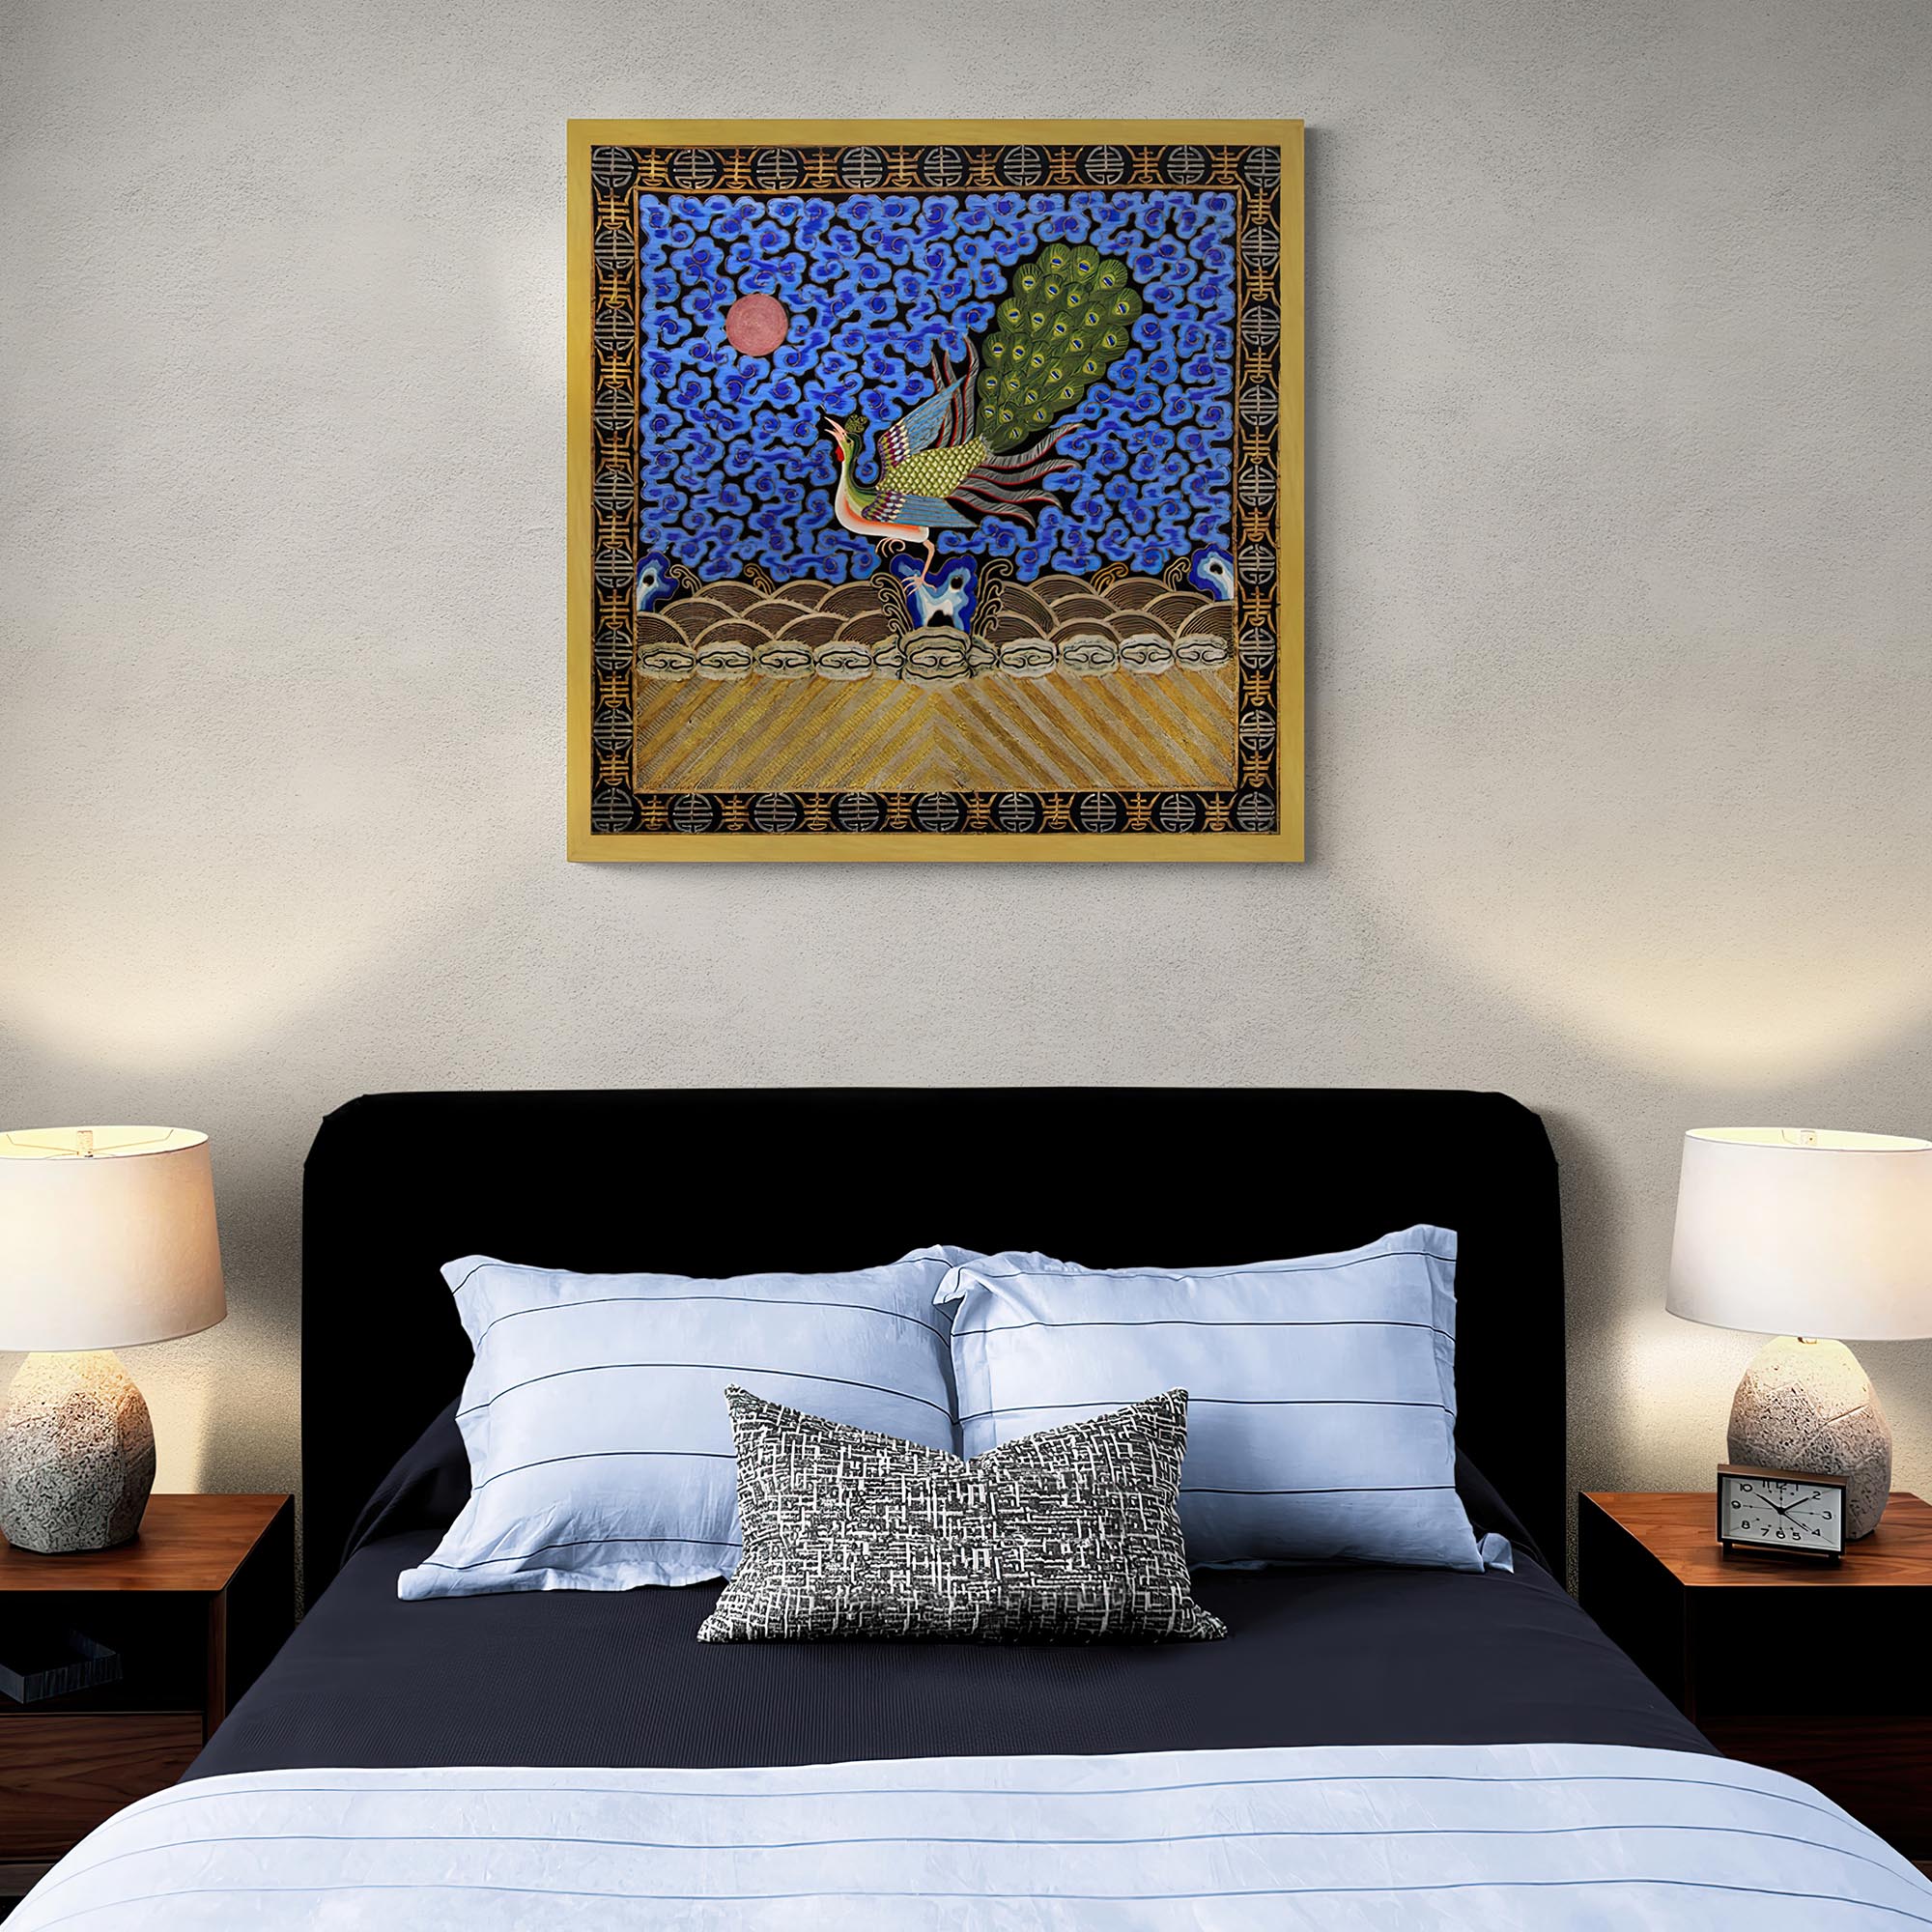 Fine art Peacock Mandarin Square  | Traditional Chinese Qing Dynasty Silk Embroidery Design | Antique Framed Fine Art Print